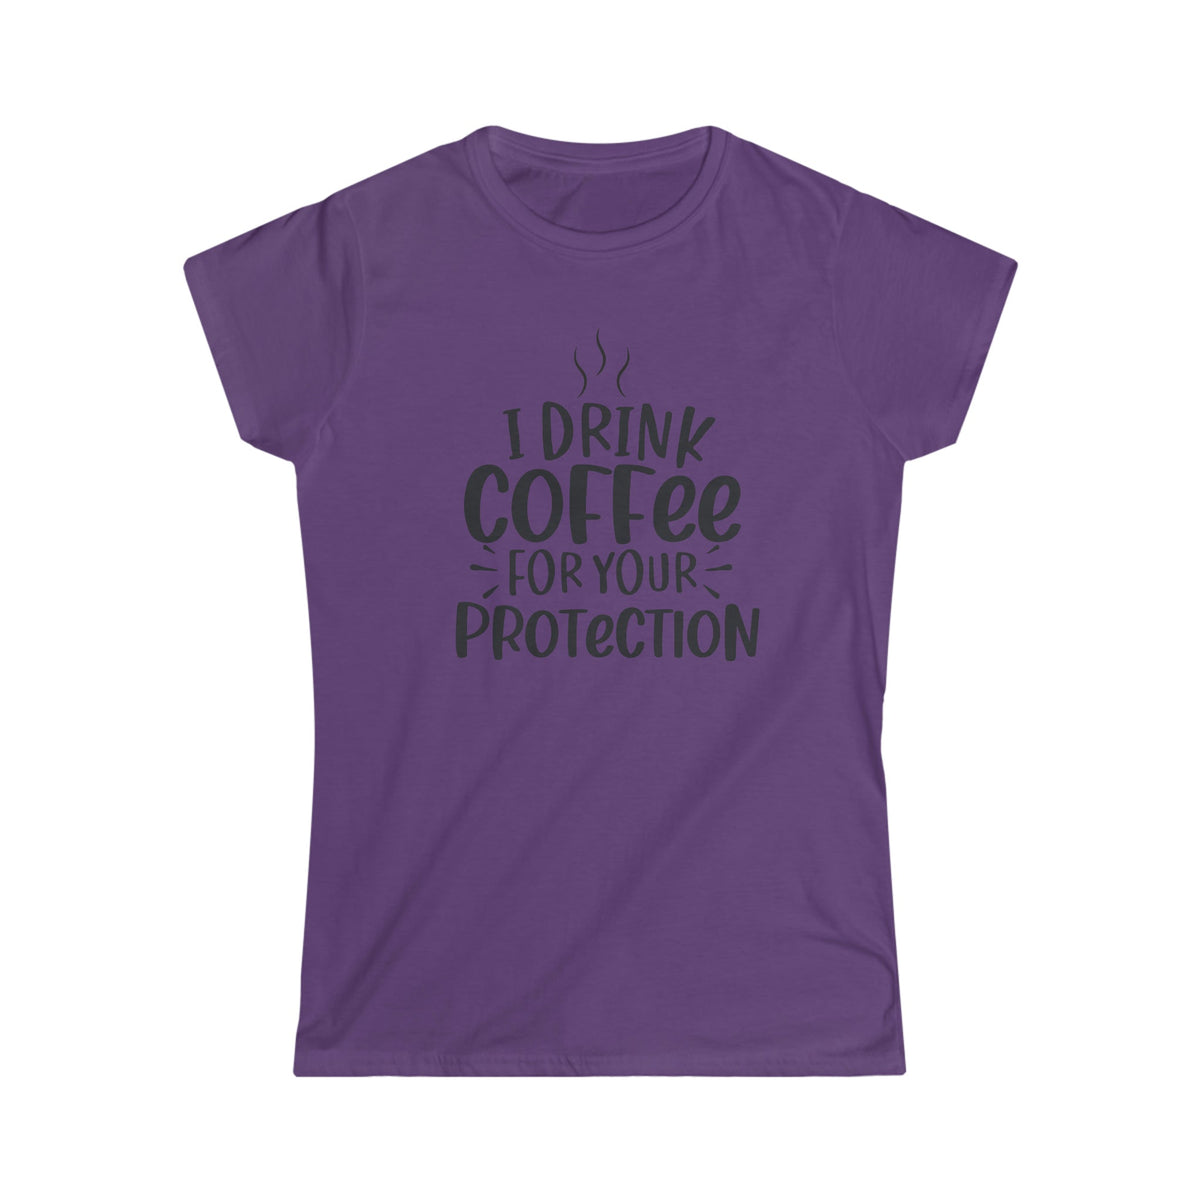 I drink Coffee For Your Protection Women's Soft Style Tee - Salty Medic Clothing Co.